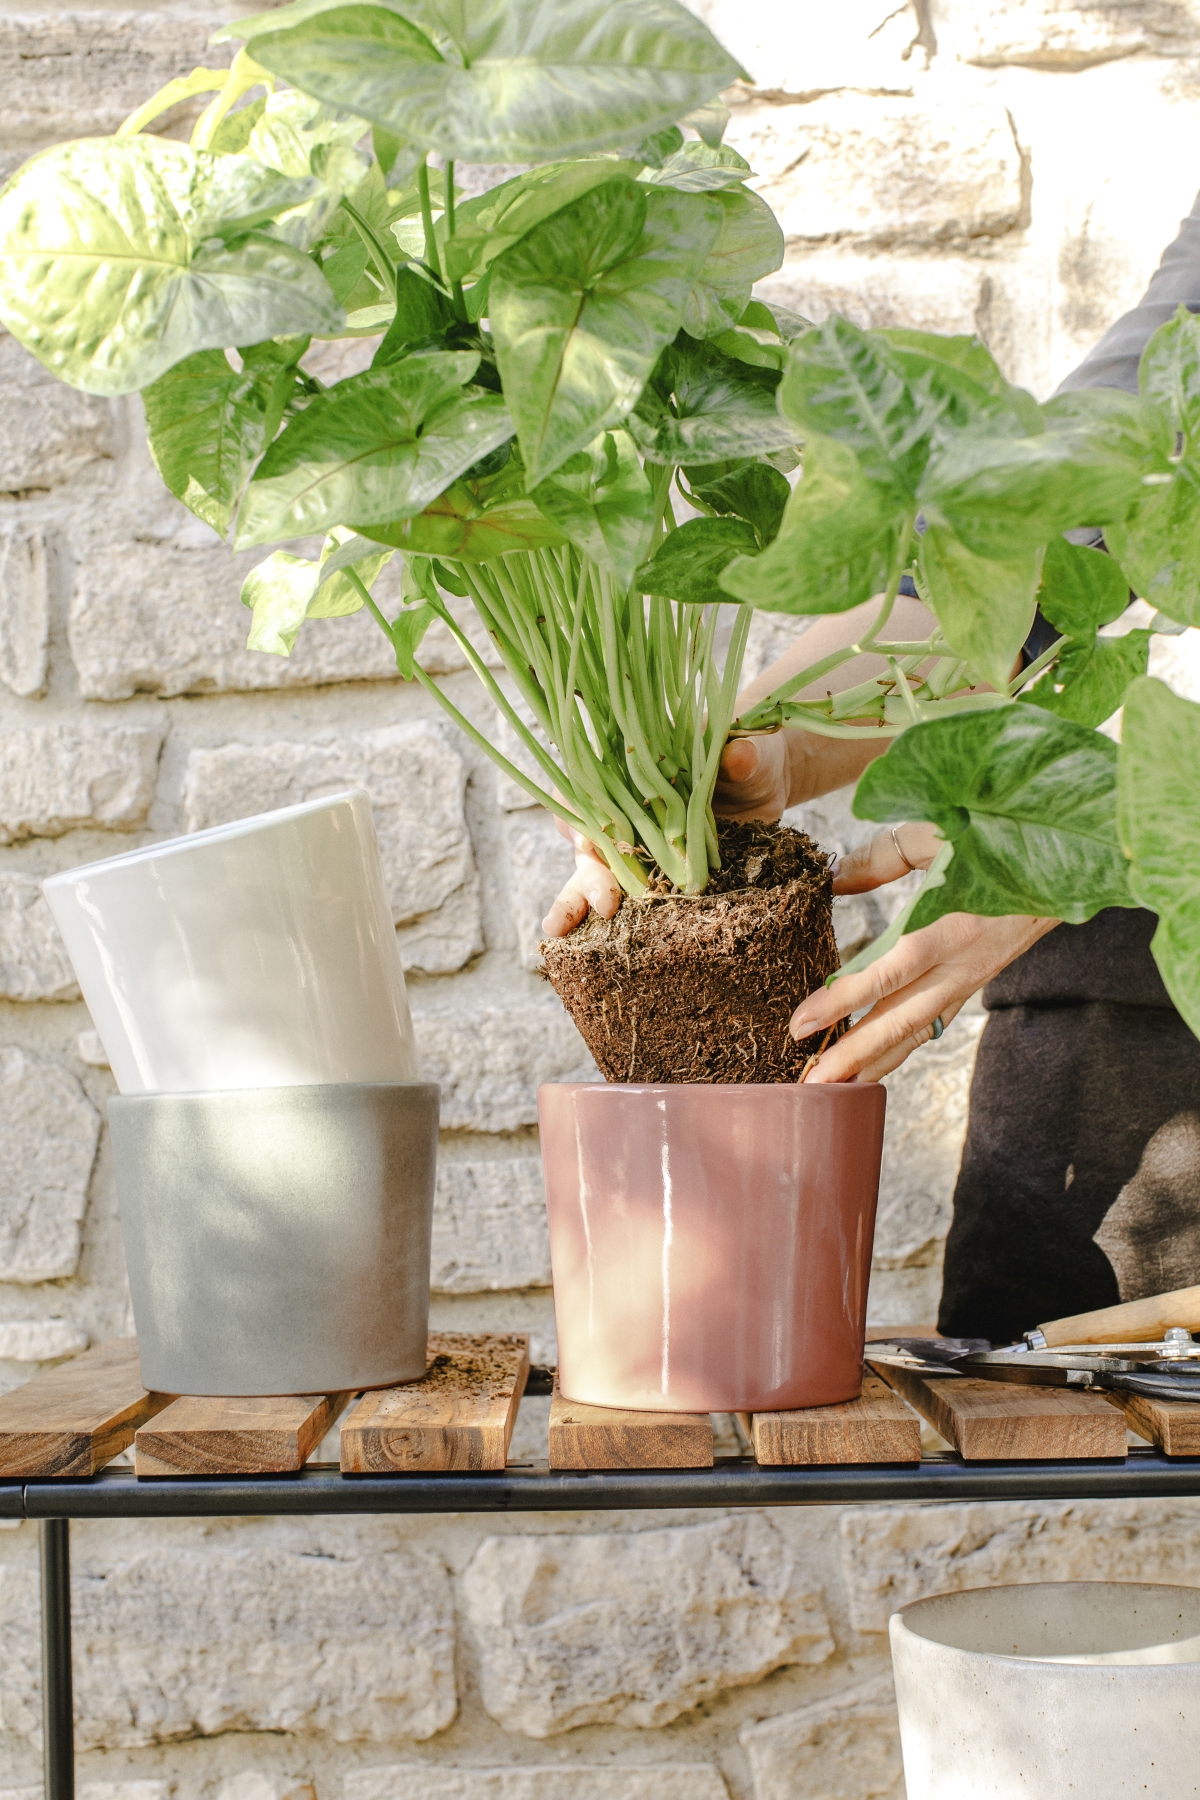 JOELIX.com | Spring Collection H&M Home with houseplants and Urban Jungle Bloggers